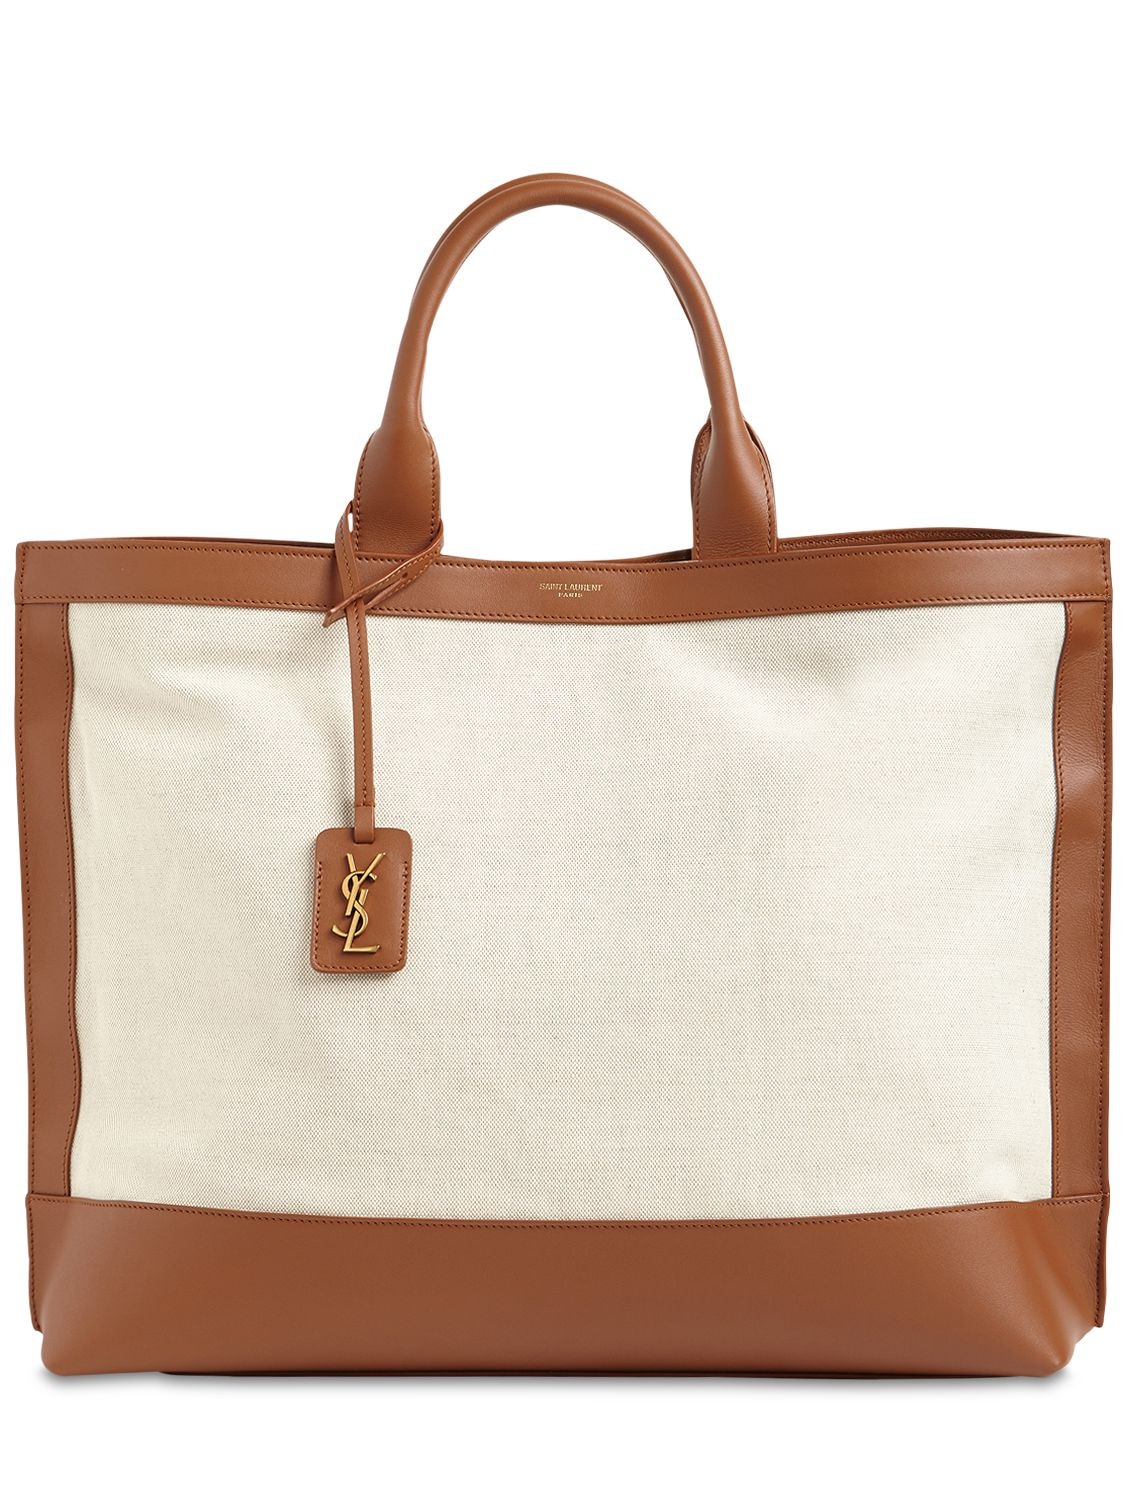 Saint Laurent Cabas Canvas & Leather Tote Bag In Natural,brown